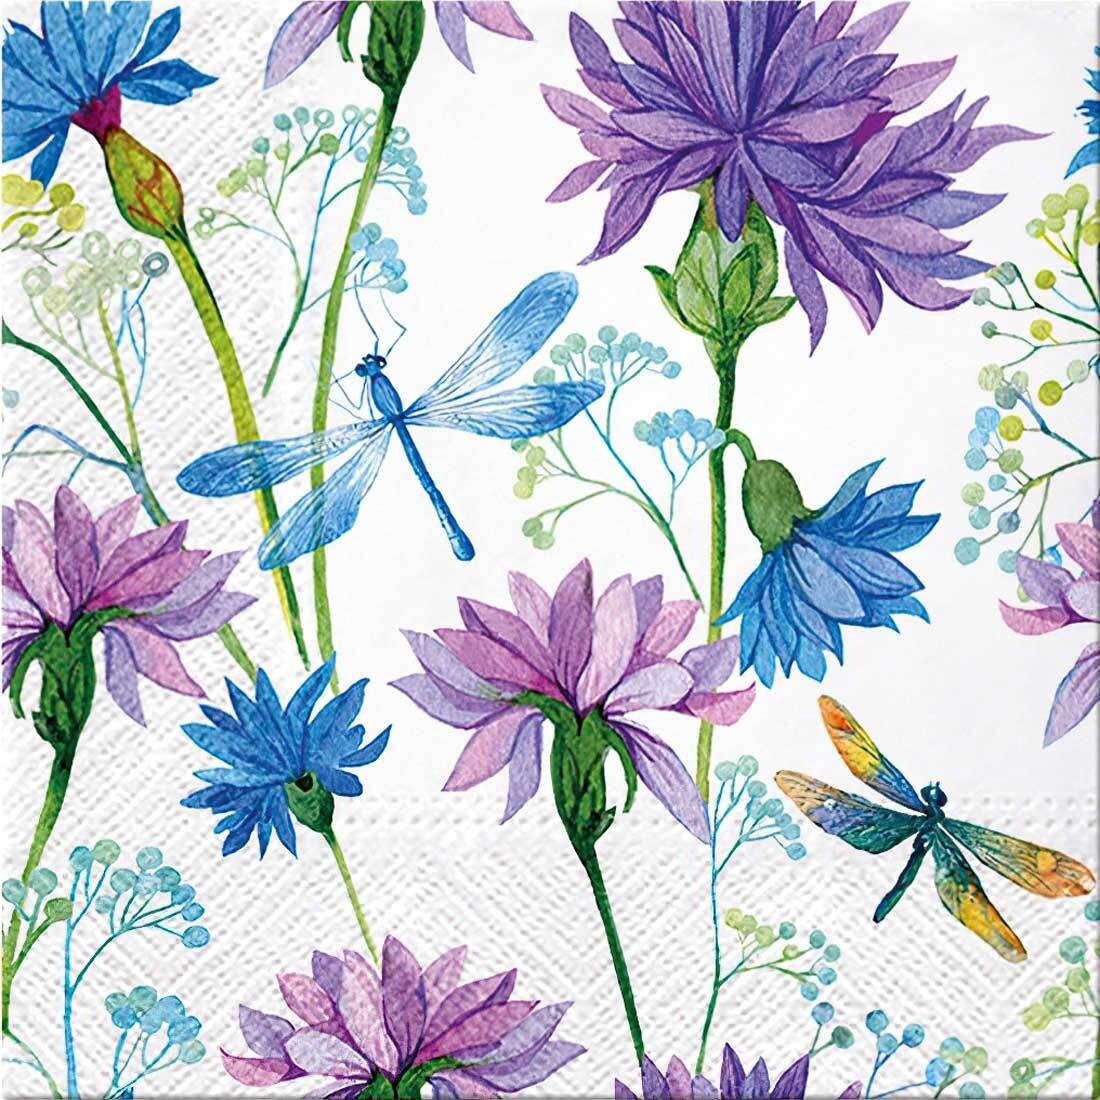 Decoupage Paper Napkins - Butterflies - Flowers With Dragonfly (1 Sheet) Out of Stock